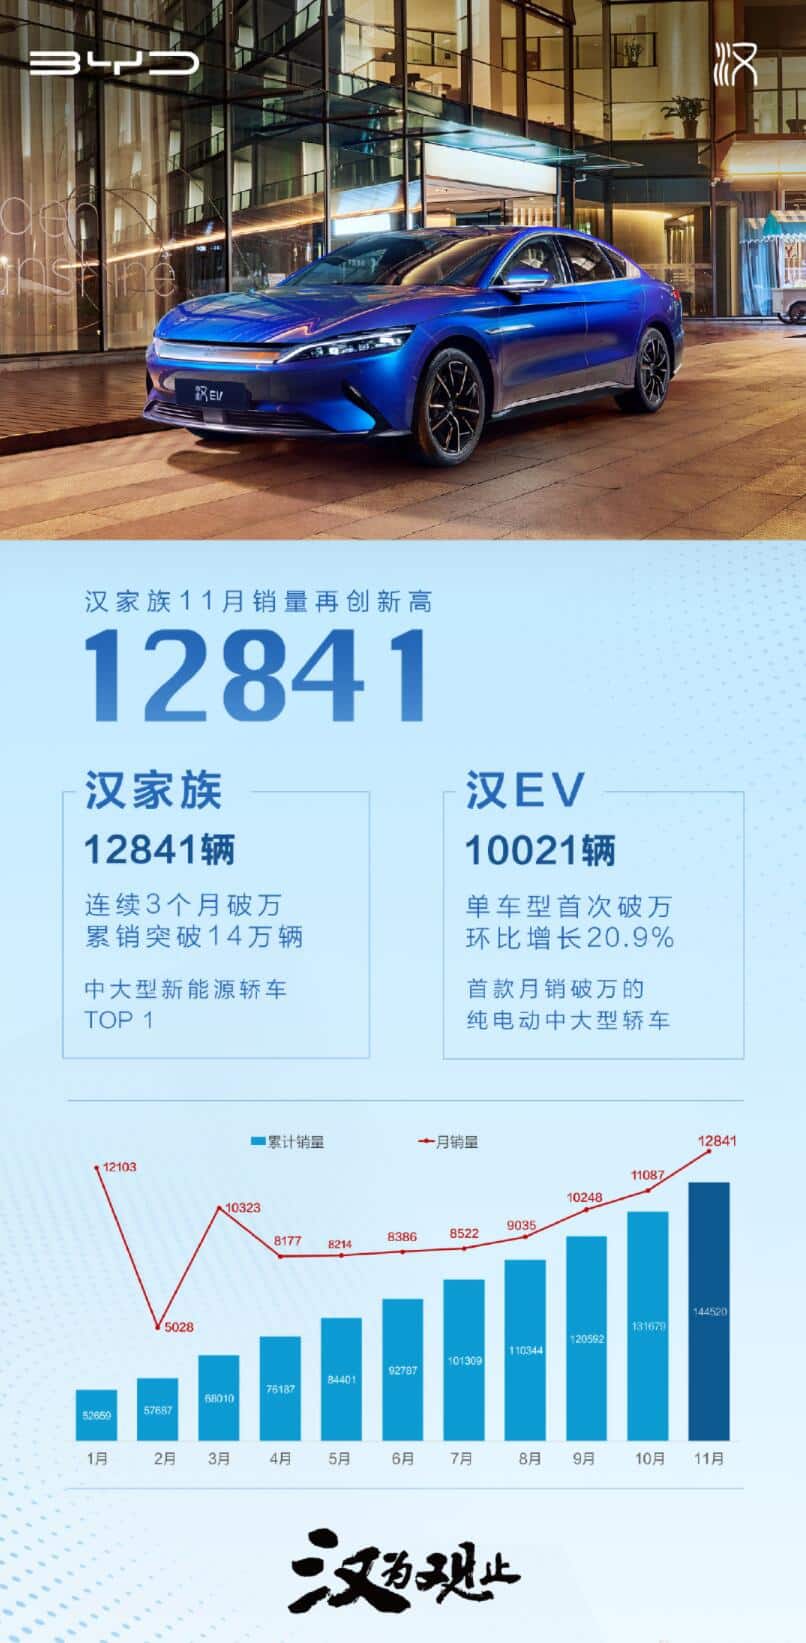 BYD's Han family sold 12,841 units in Nov, Han EV exceeded 10,000 for first time-CnEVPost